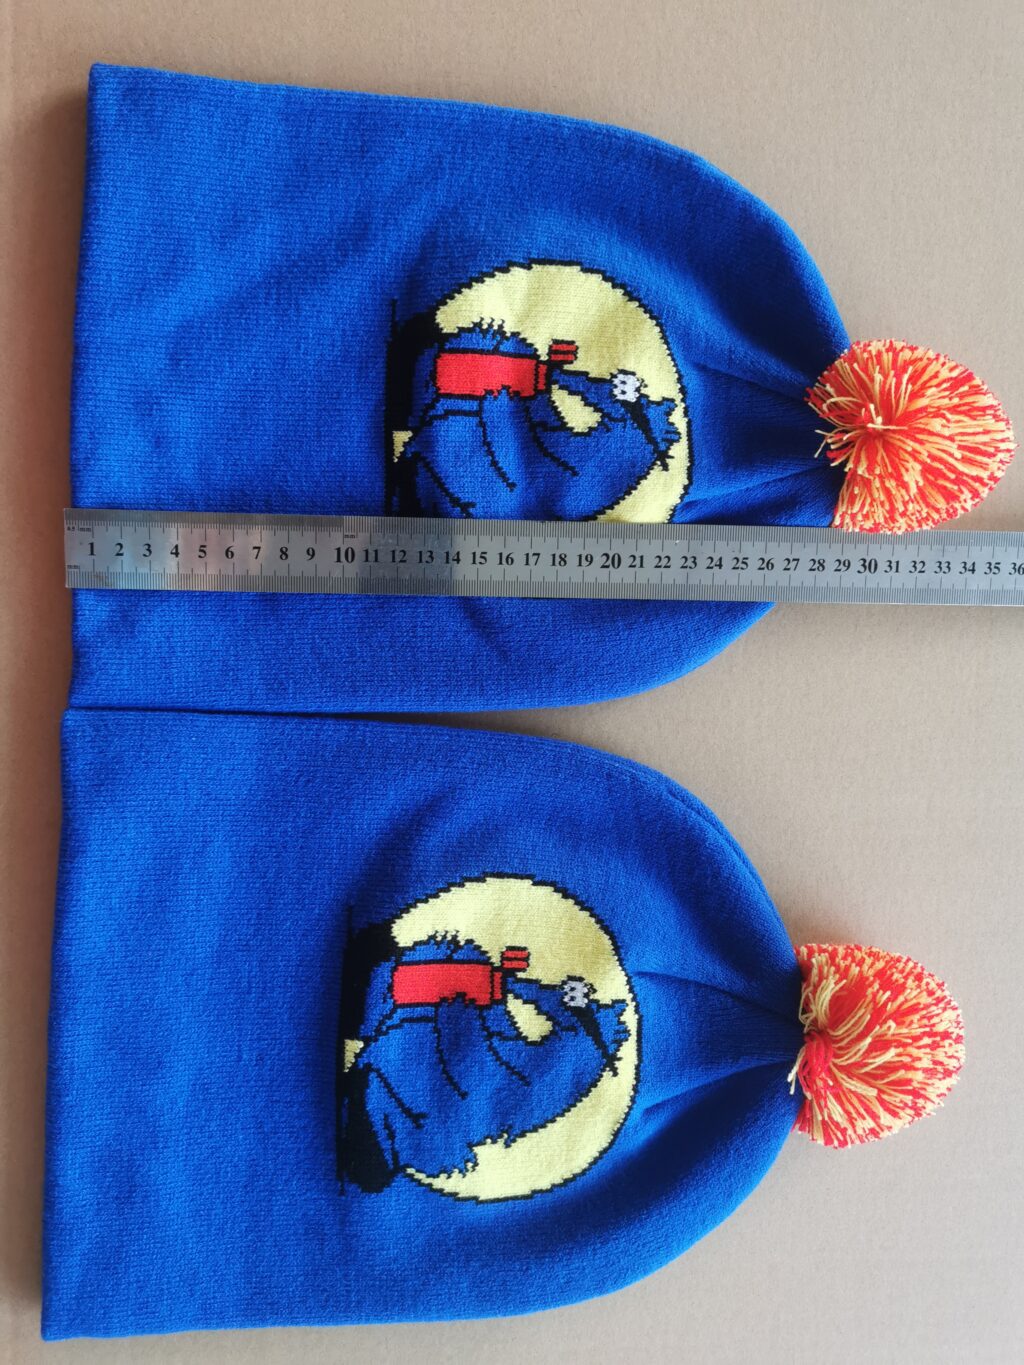 Two Aardvark beanies with ruler laying across them.